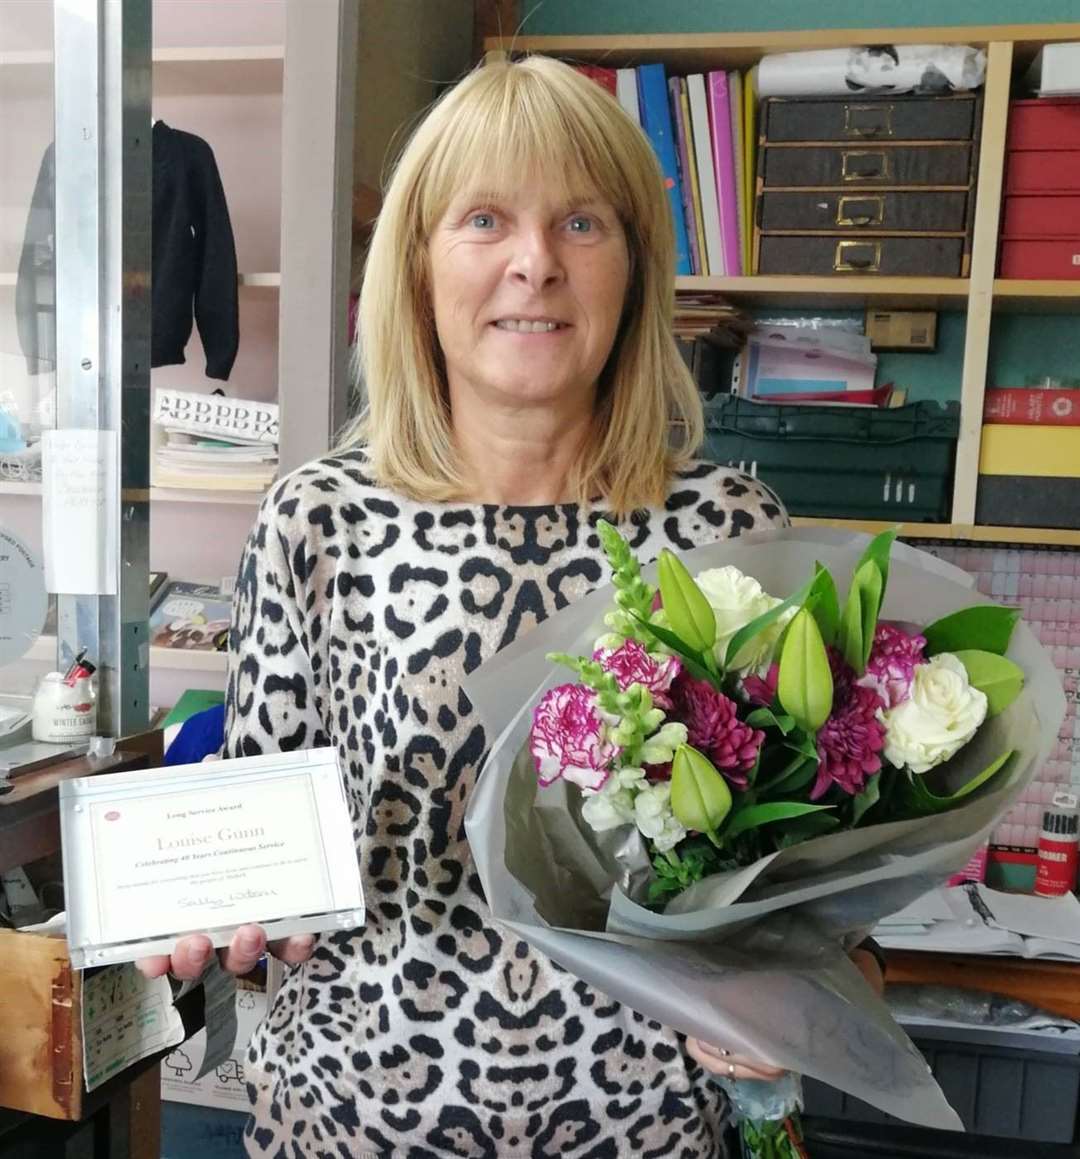 Halkirk postmaster Louise Gunn with her long service award and flowers.